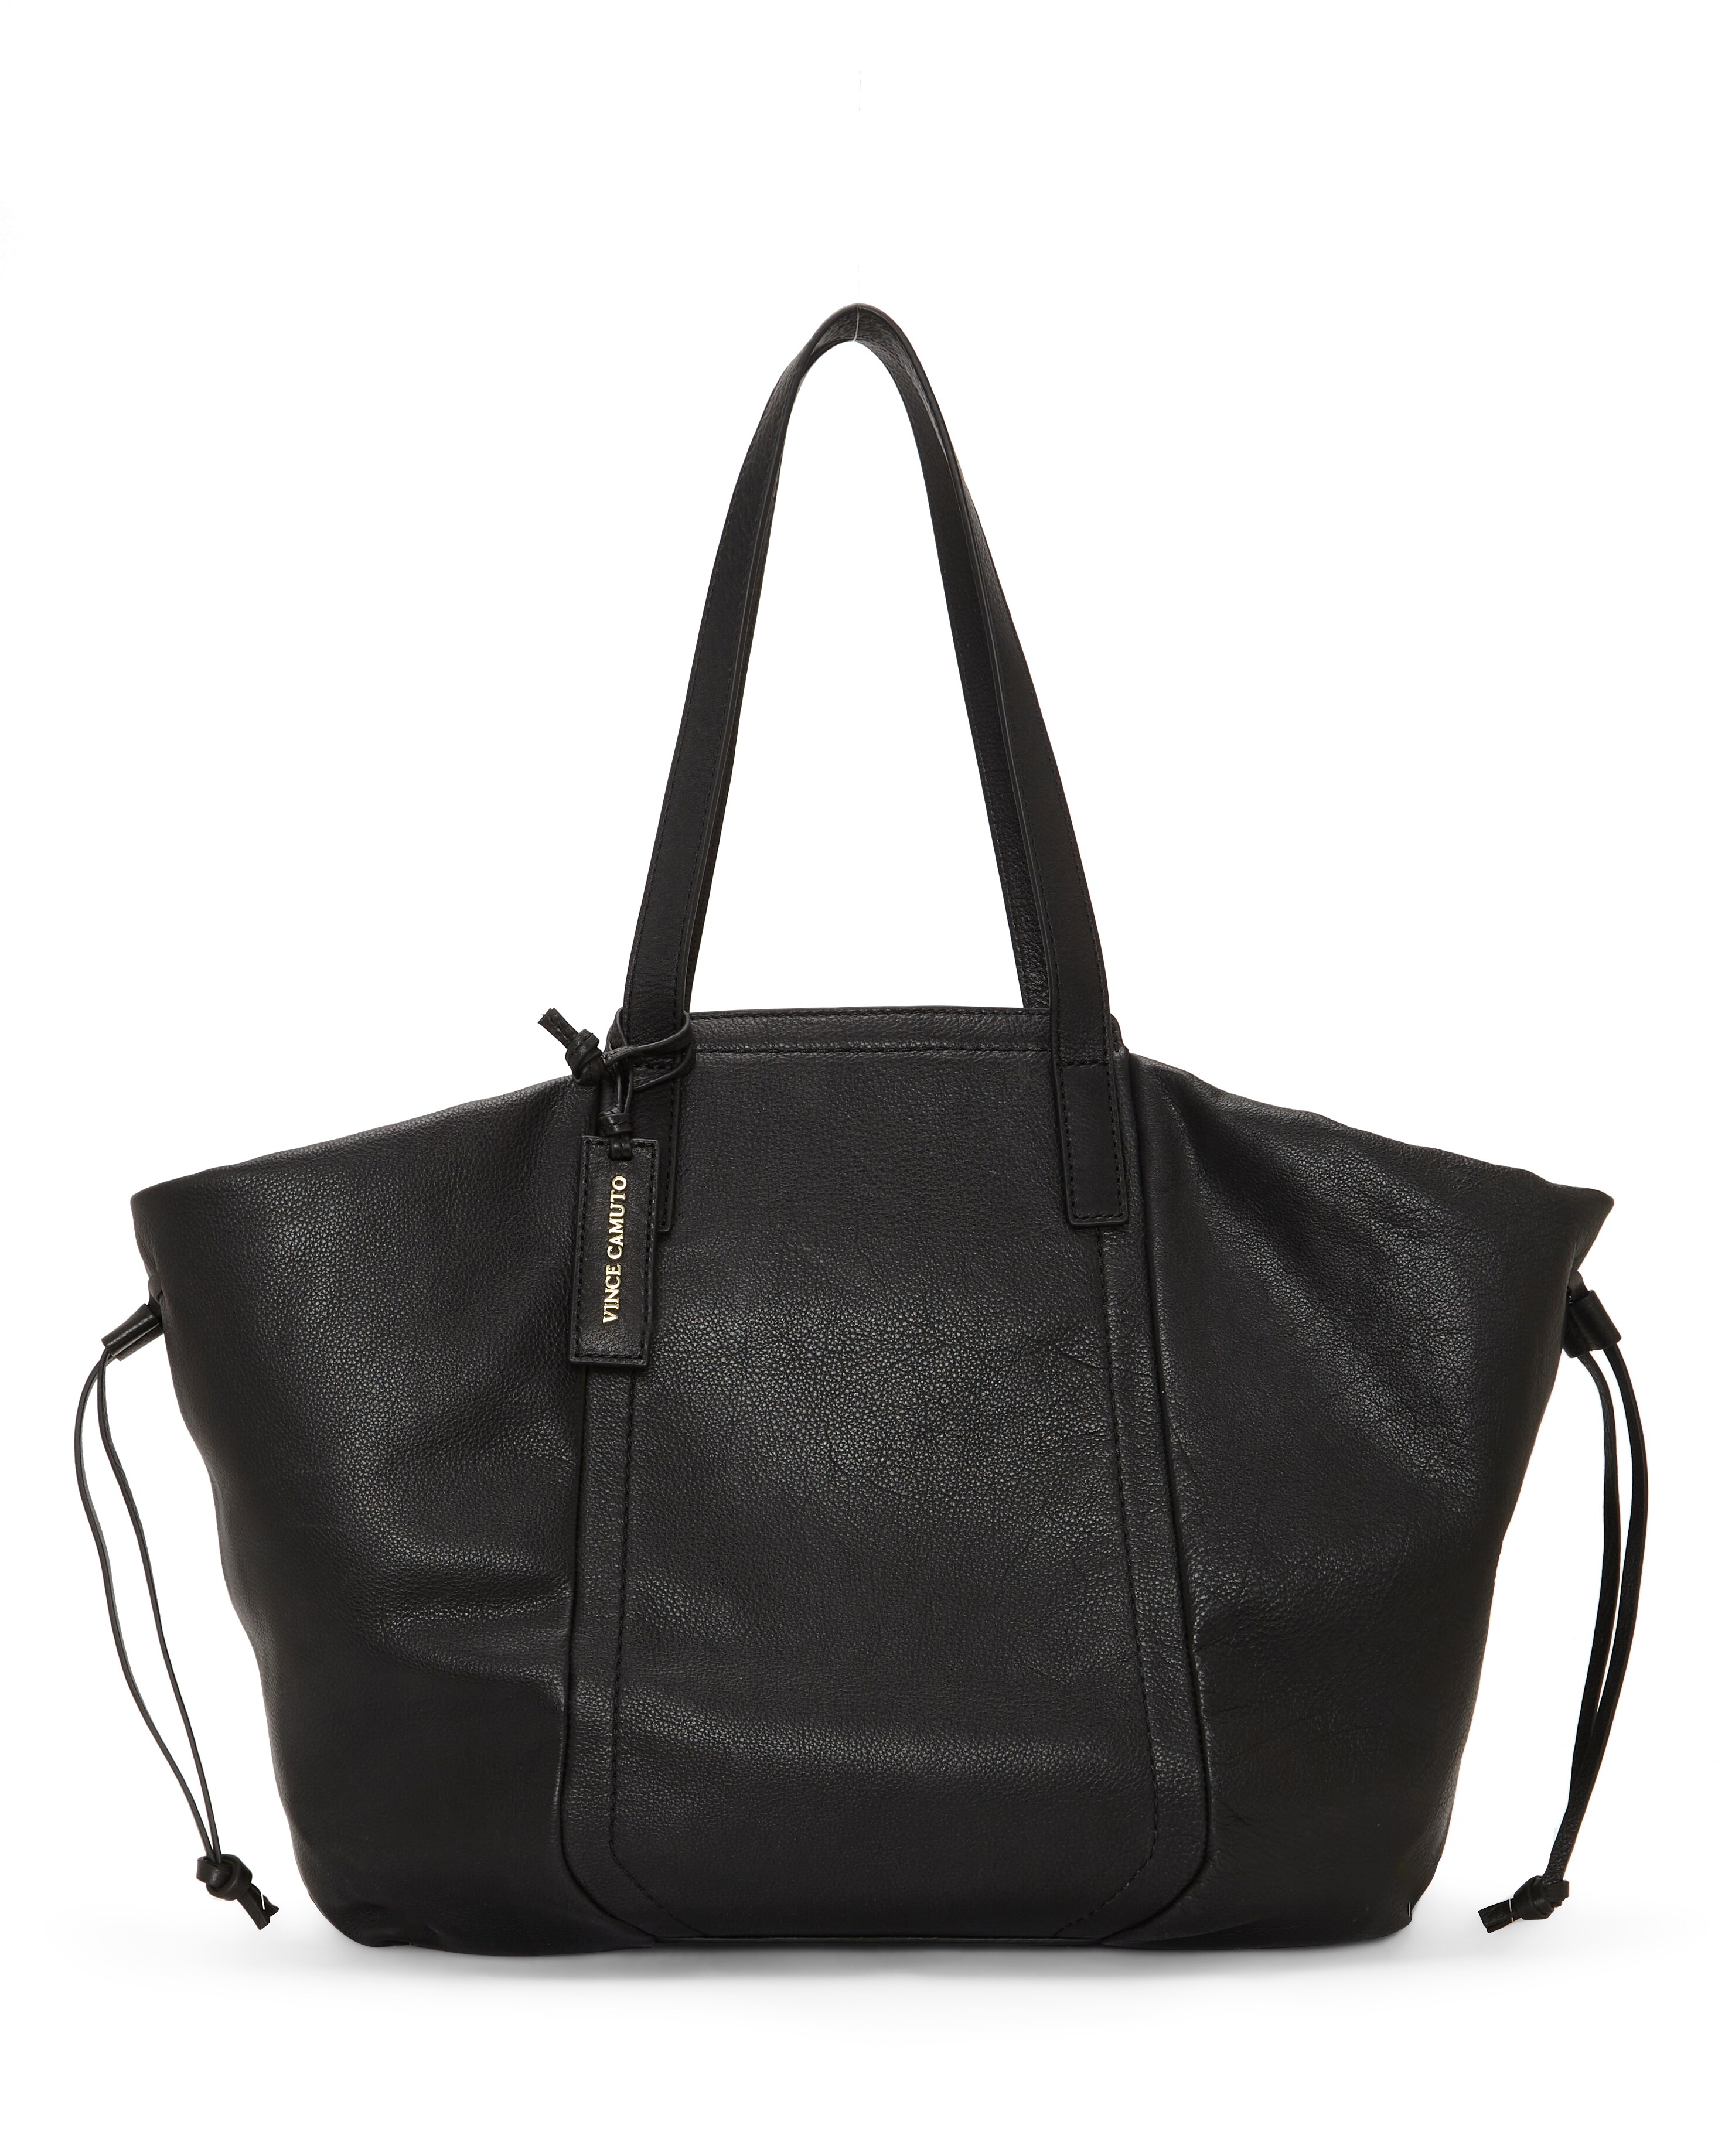 Vince Camuto Fabia Tote | Vince Camuto